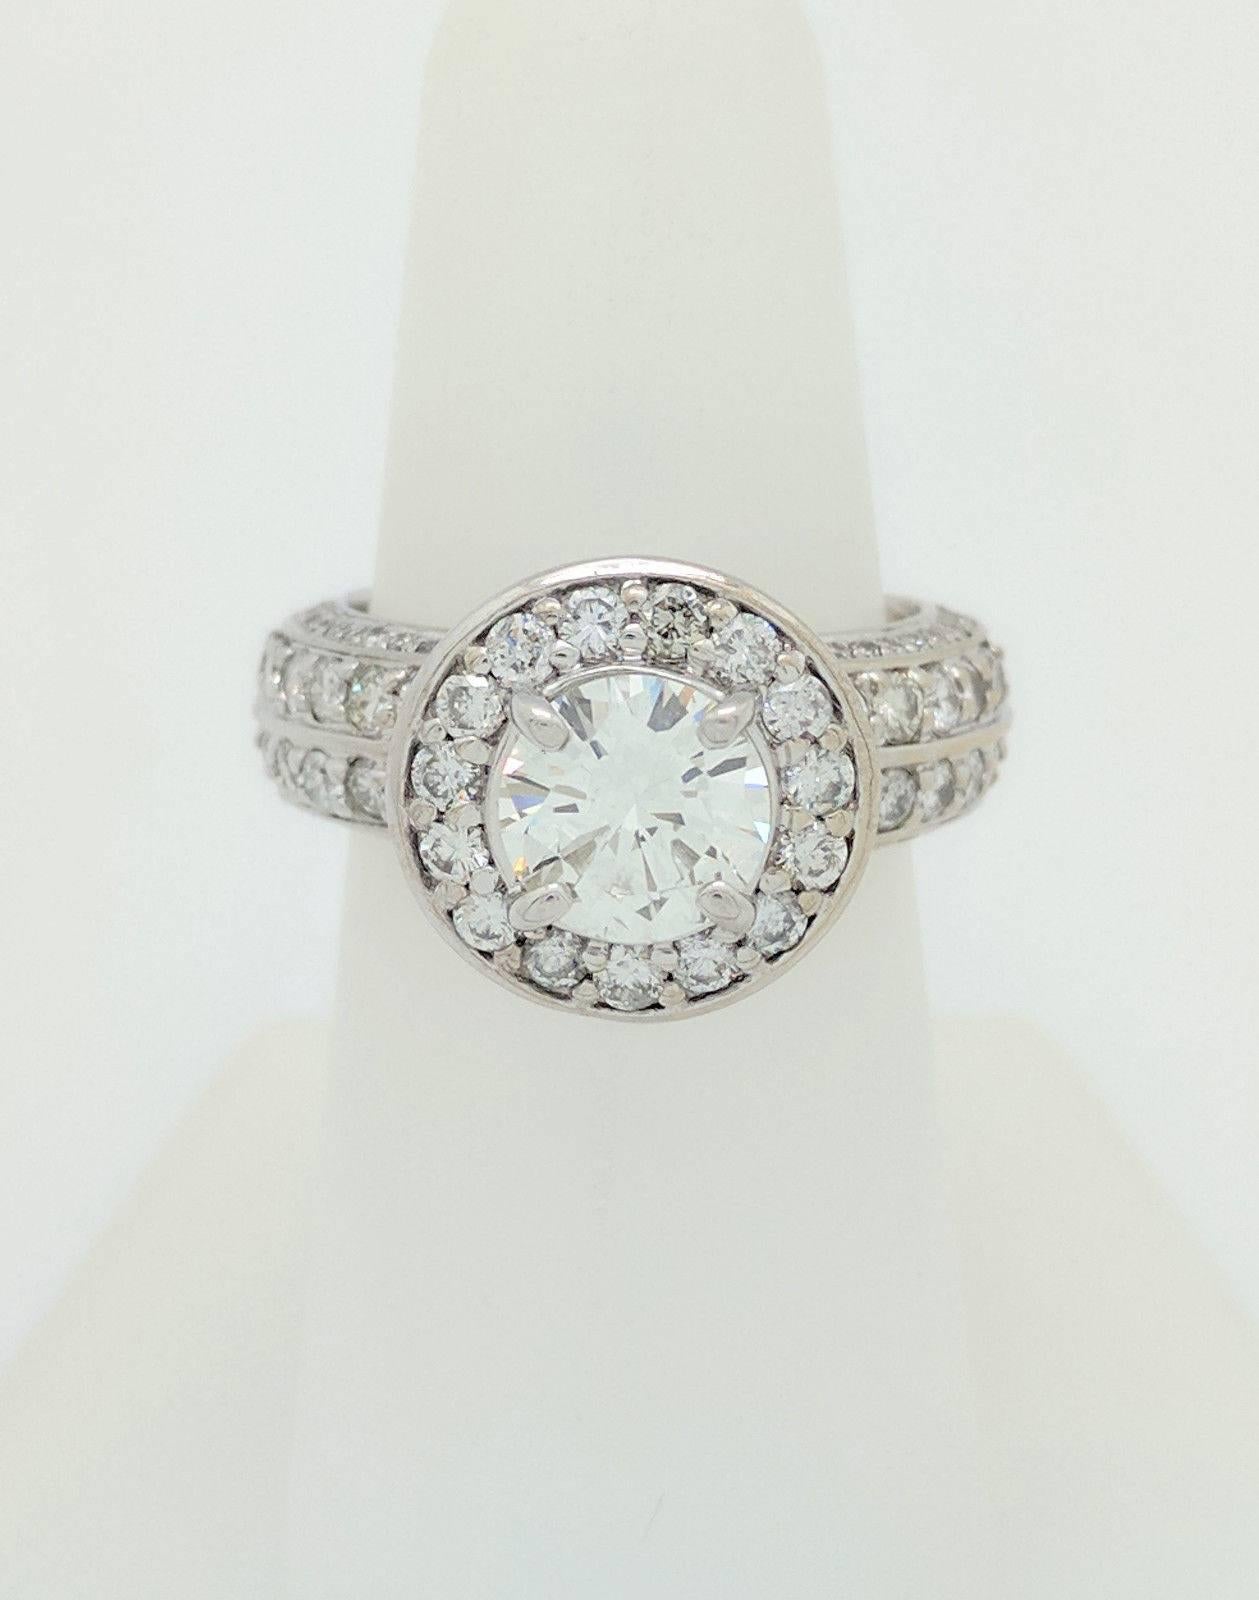 14K White Gold 1.30ct Round Brilliant Cut Diamond Halo Engagement Ring SI1/G

You are viewing a 1.30ct natural round brilliant cut diamond set in a stunning halo engagement ring. The center stone is beautifully displayed in a 14k white gold diamond